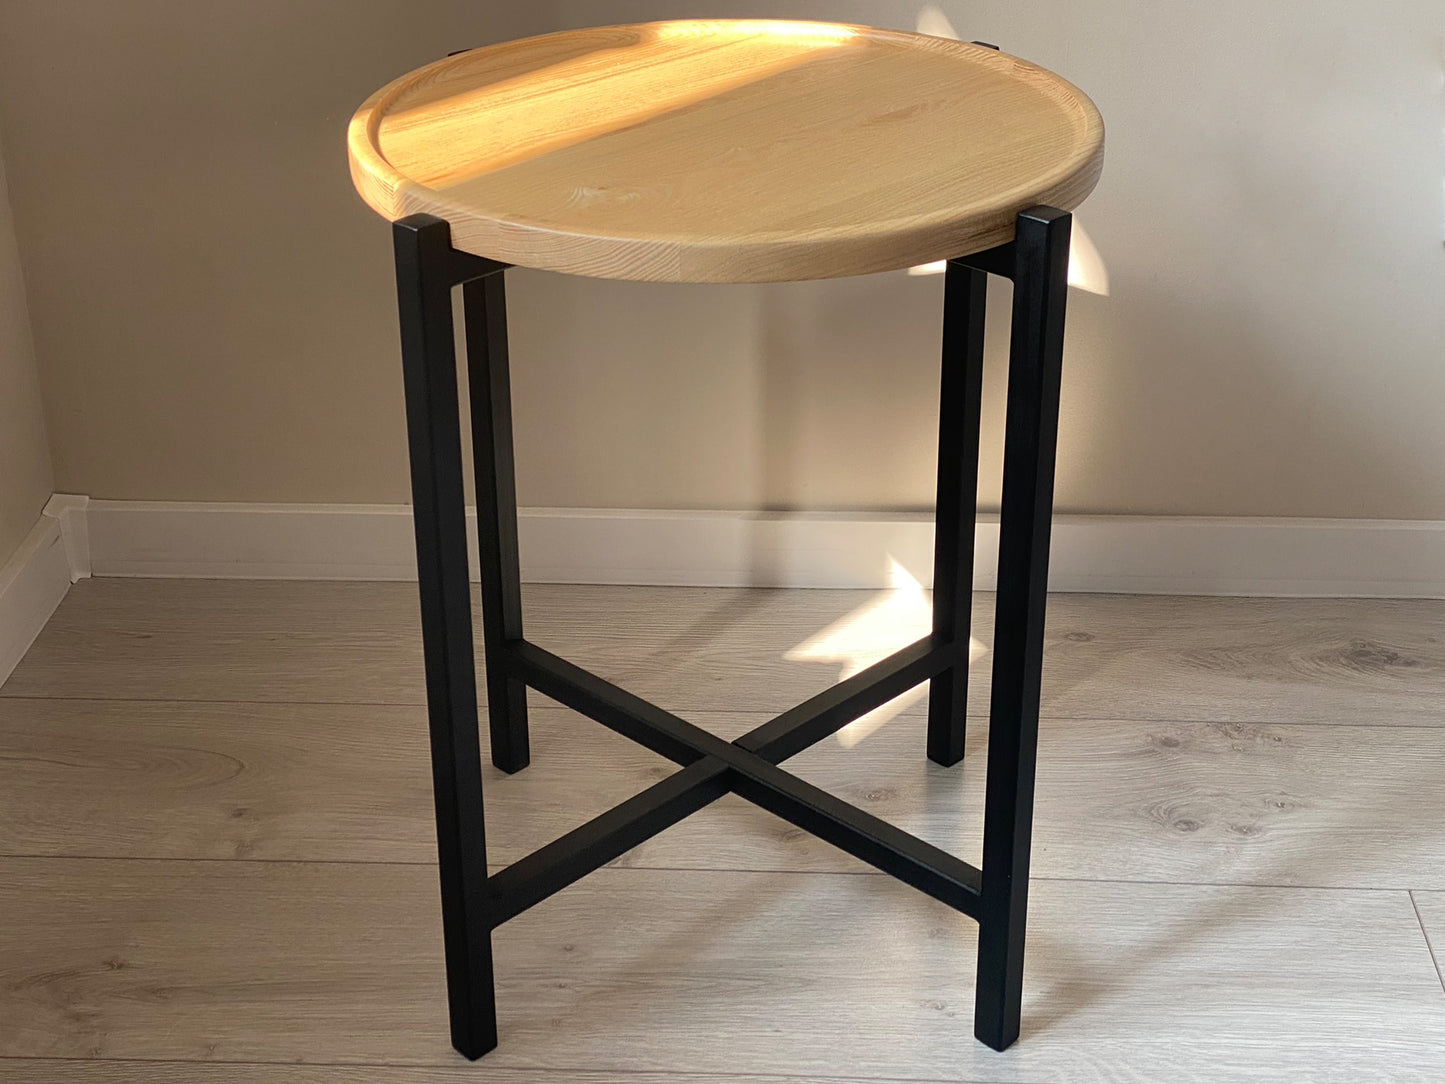 Coffe table with metal legs